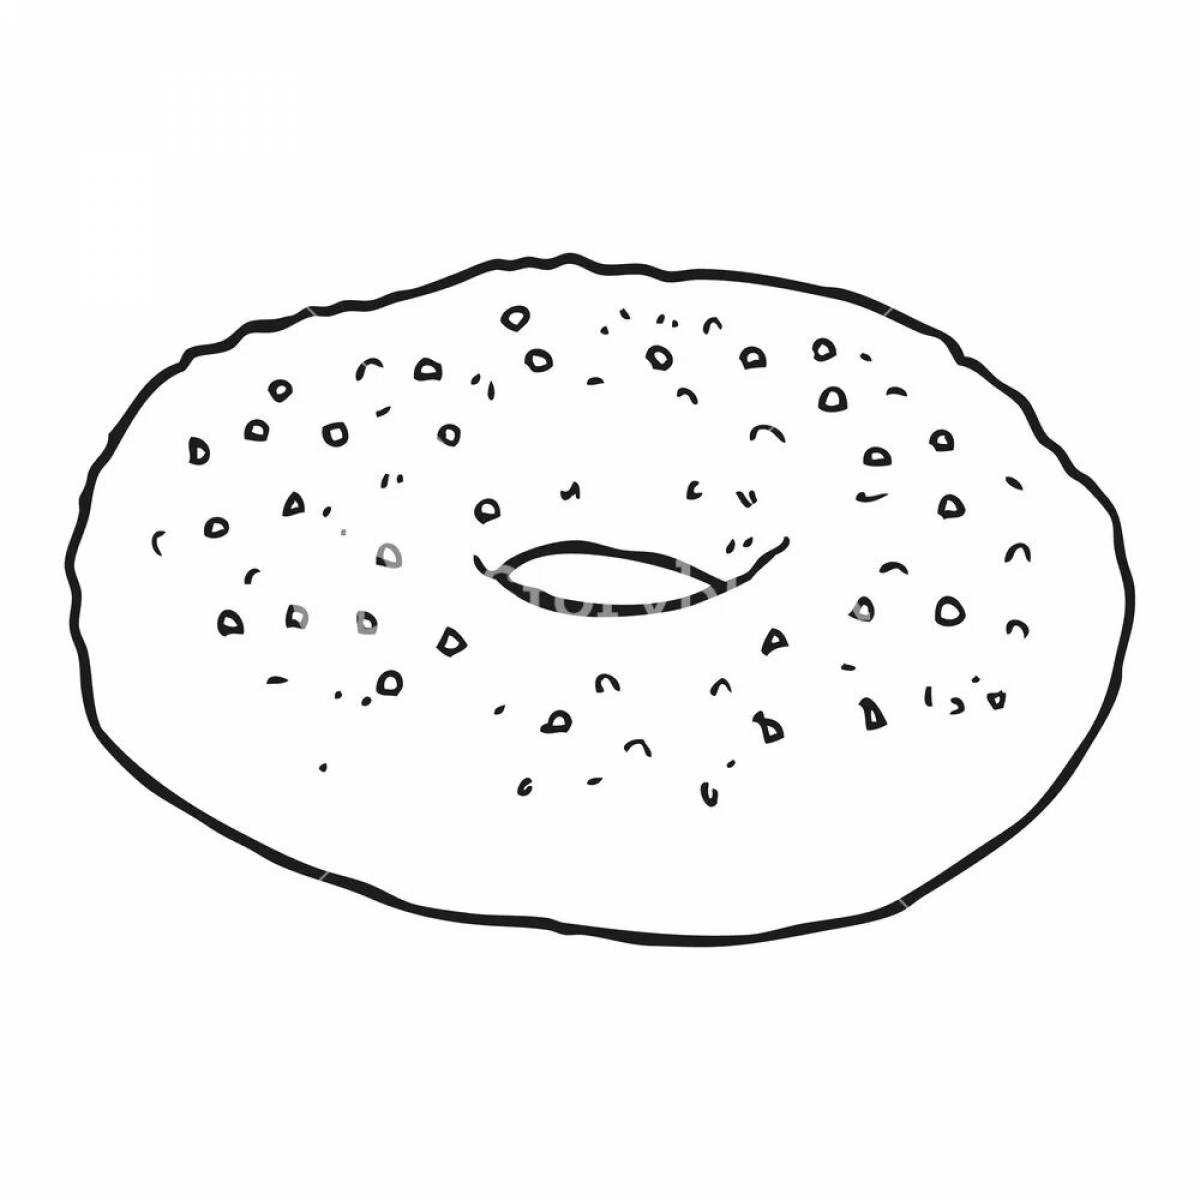 Lovely donut bagel coloring page